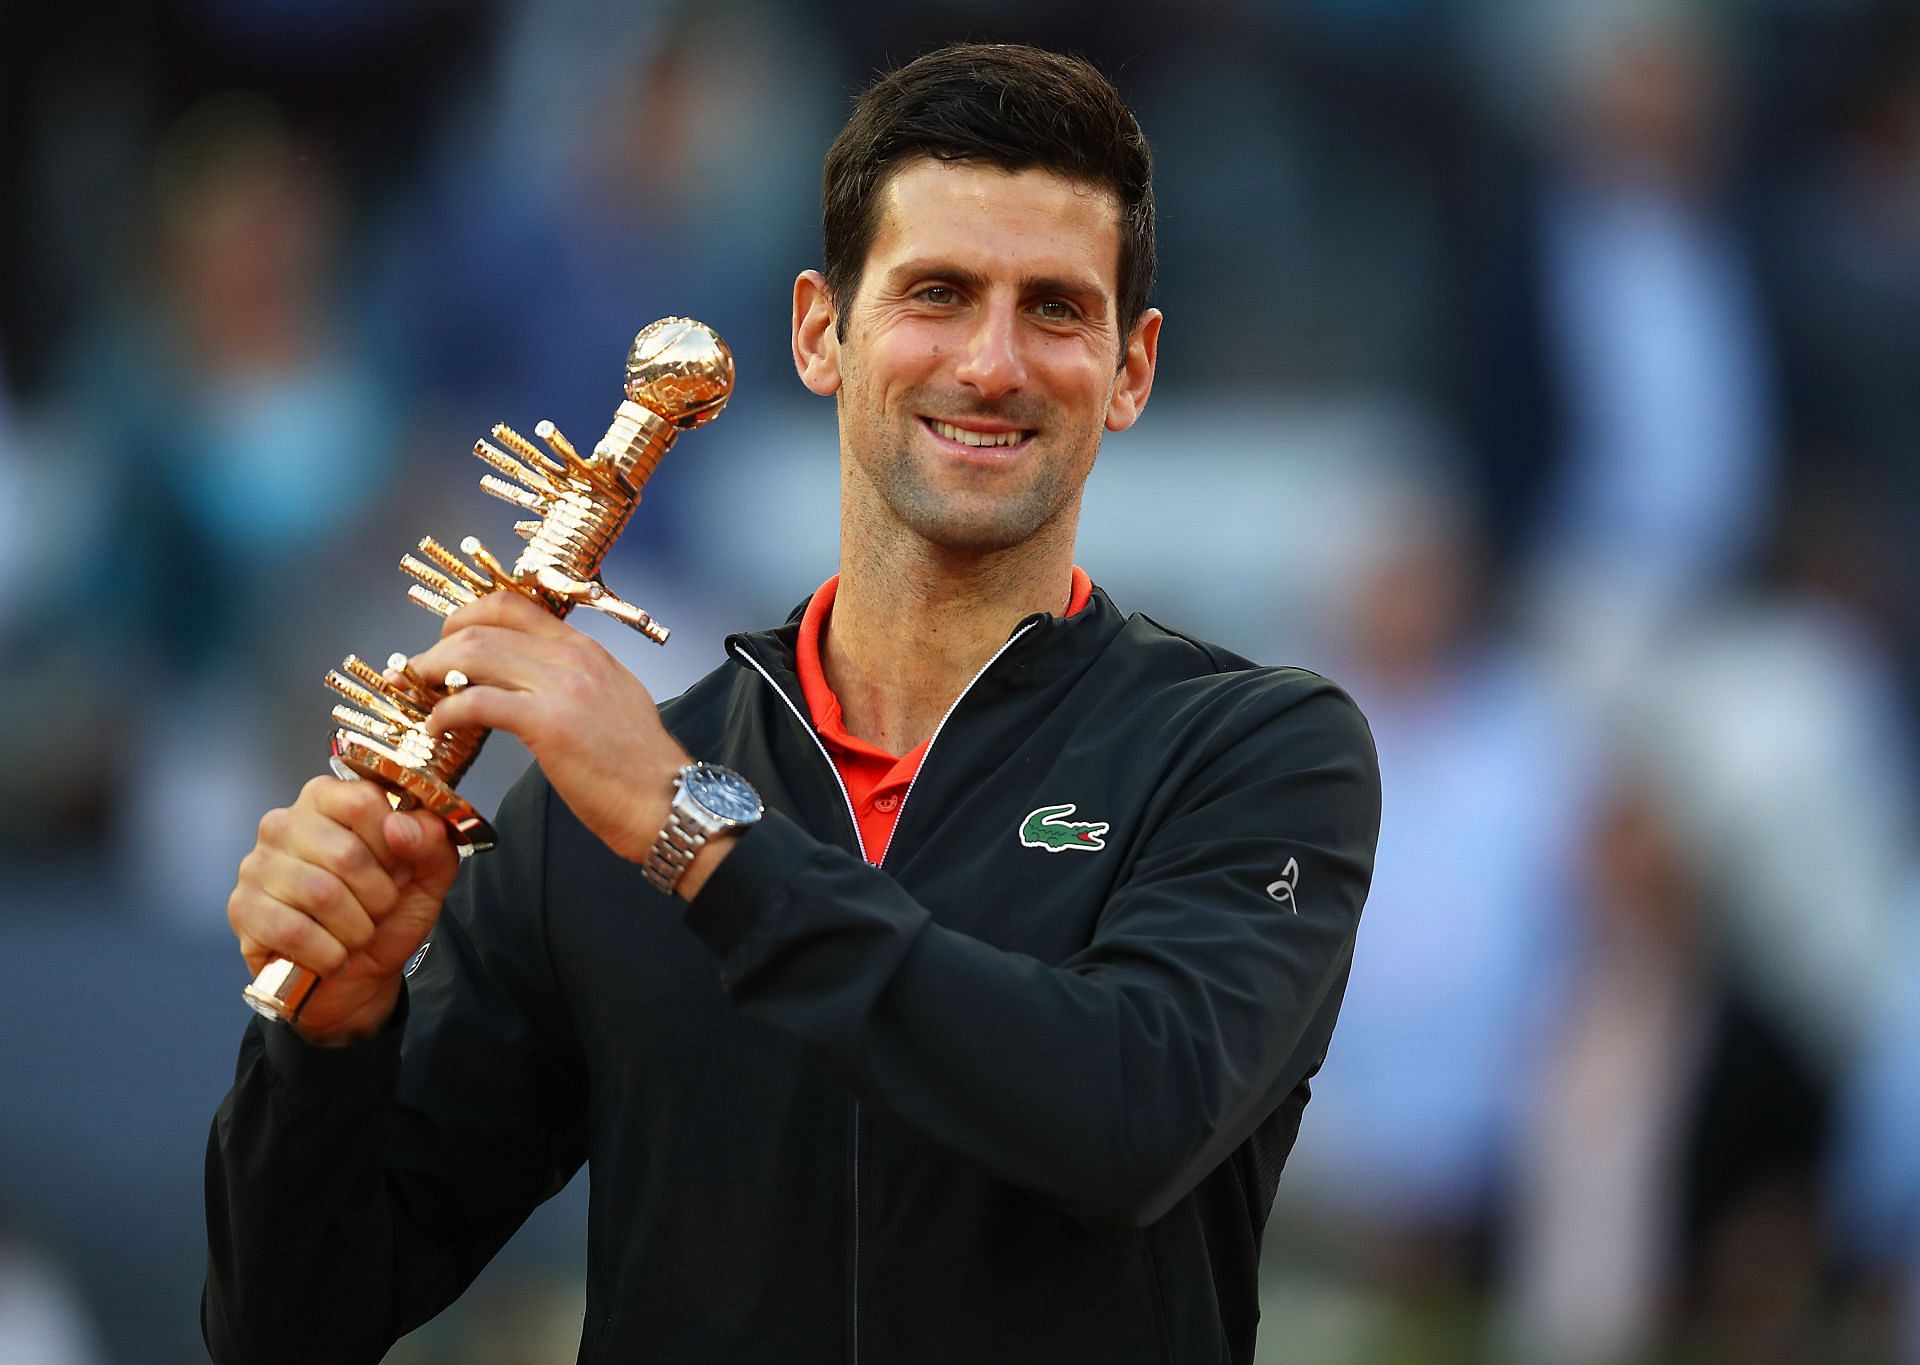 Novak Djokovic has won 10 Masters 1000 titles without dropping a set, the most in history